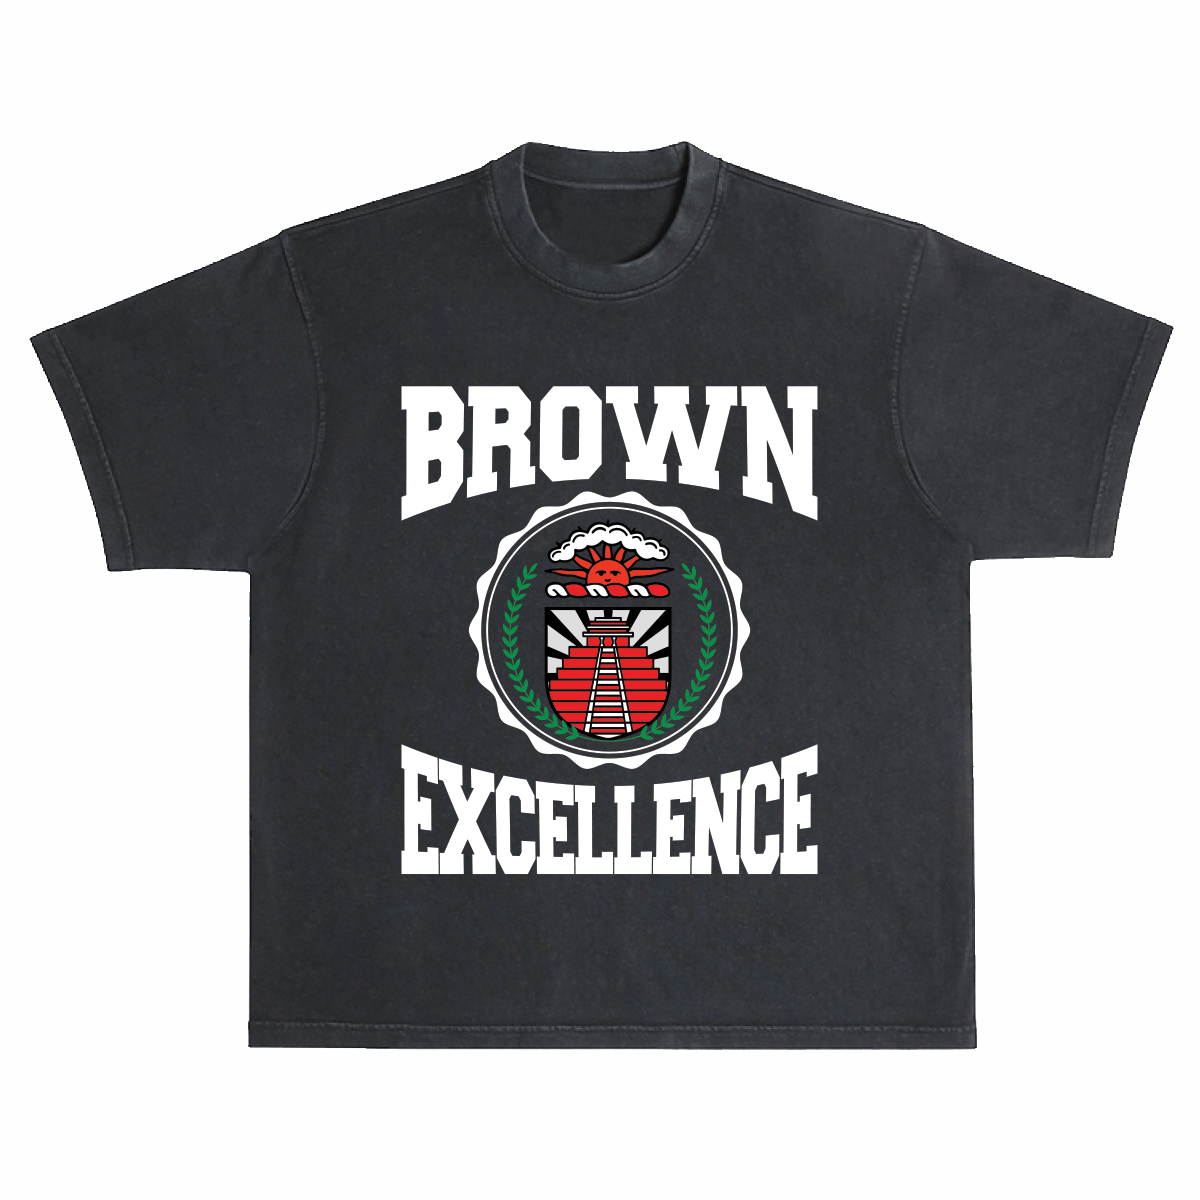 BROWN EXCELLENCE TEE - BLACK